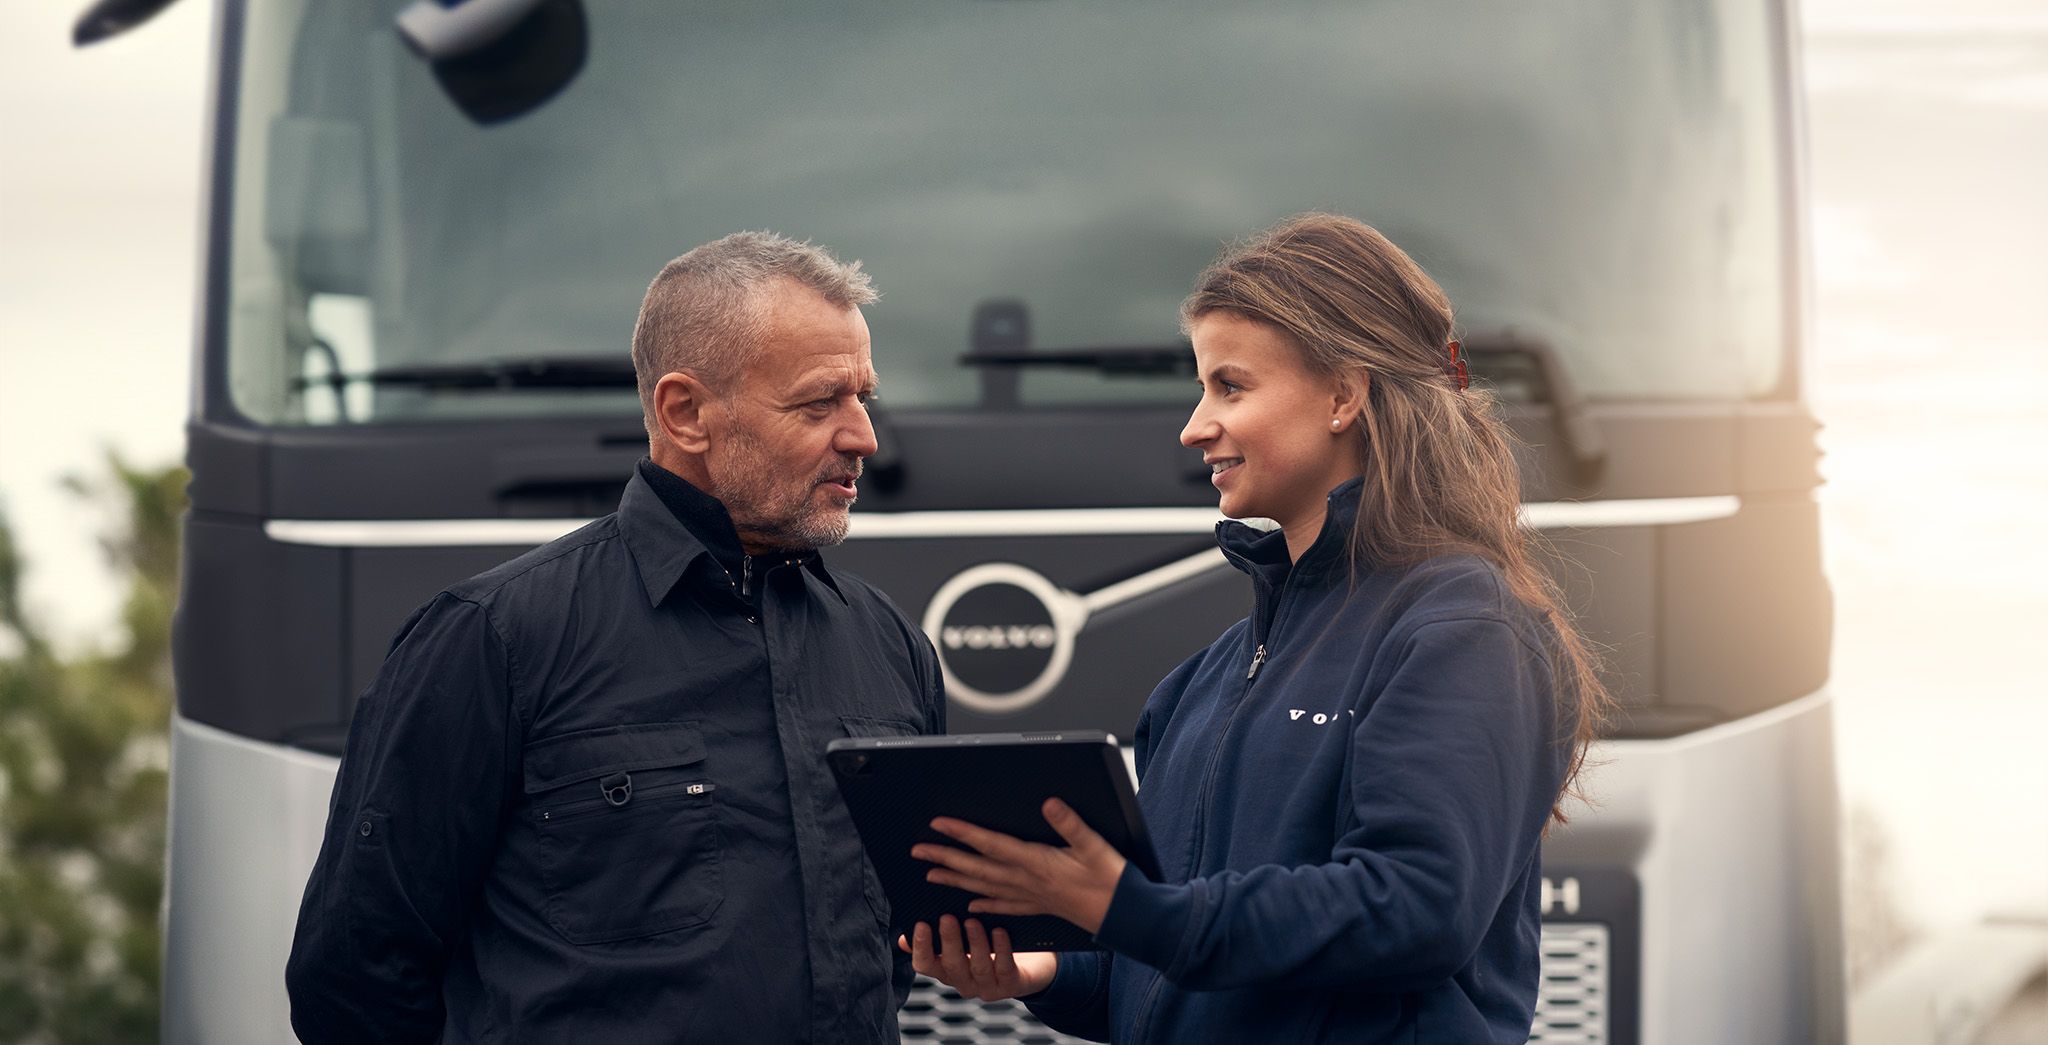 Man and female talking in front of a truck holding a digital screen